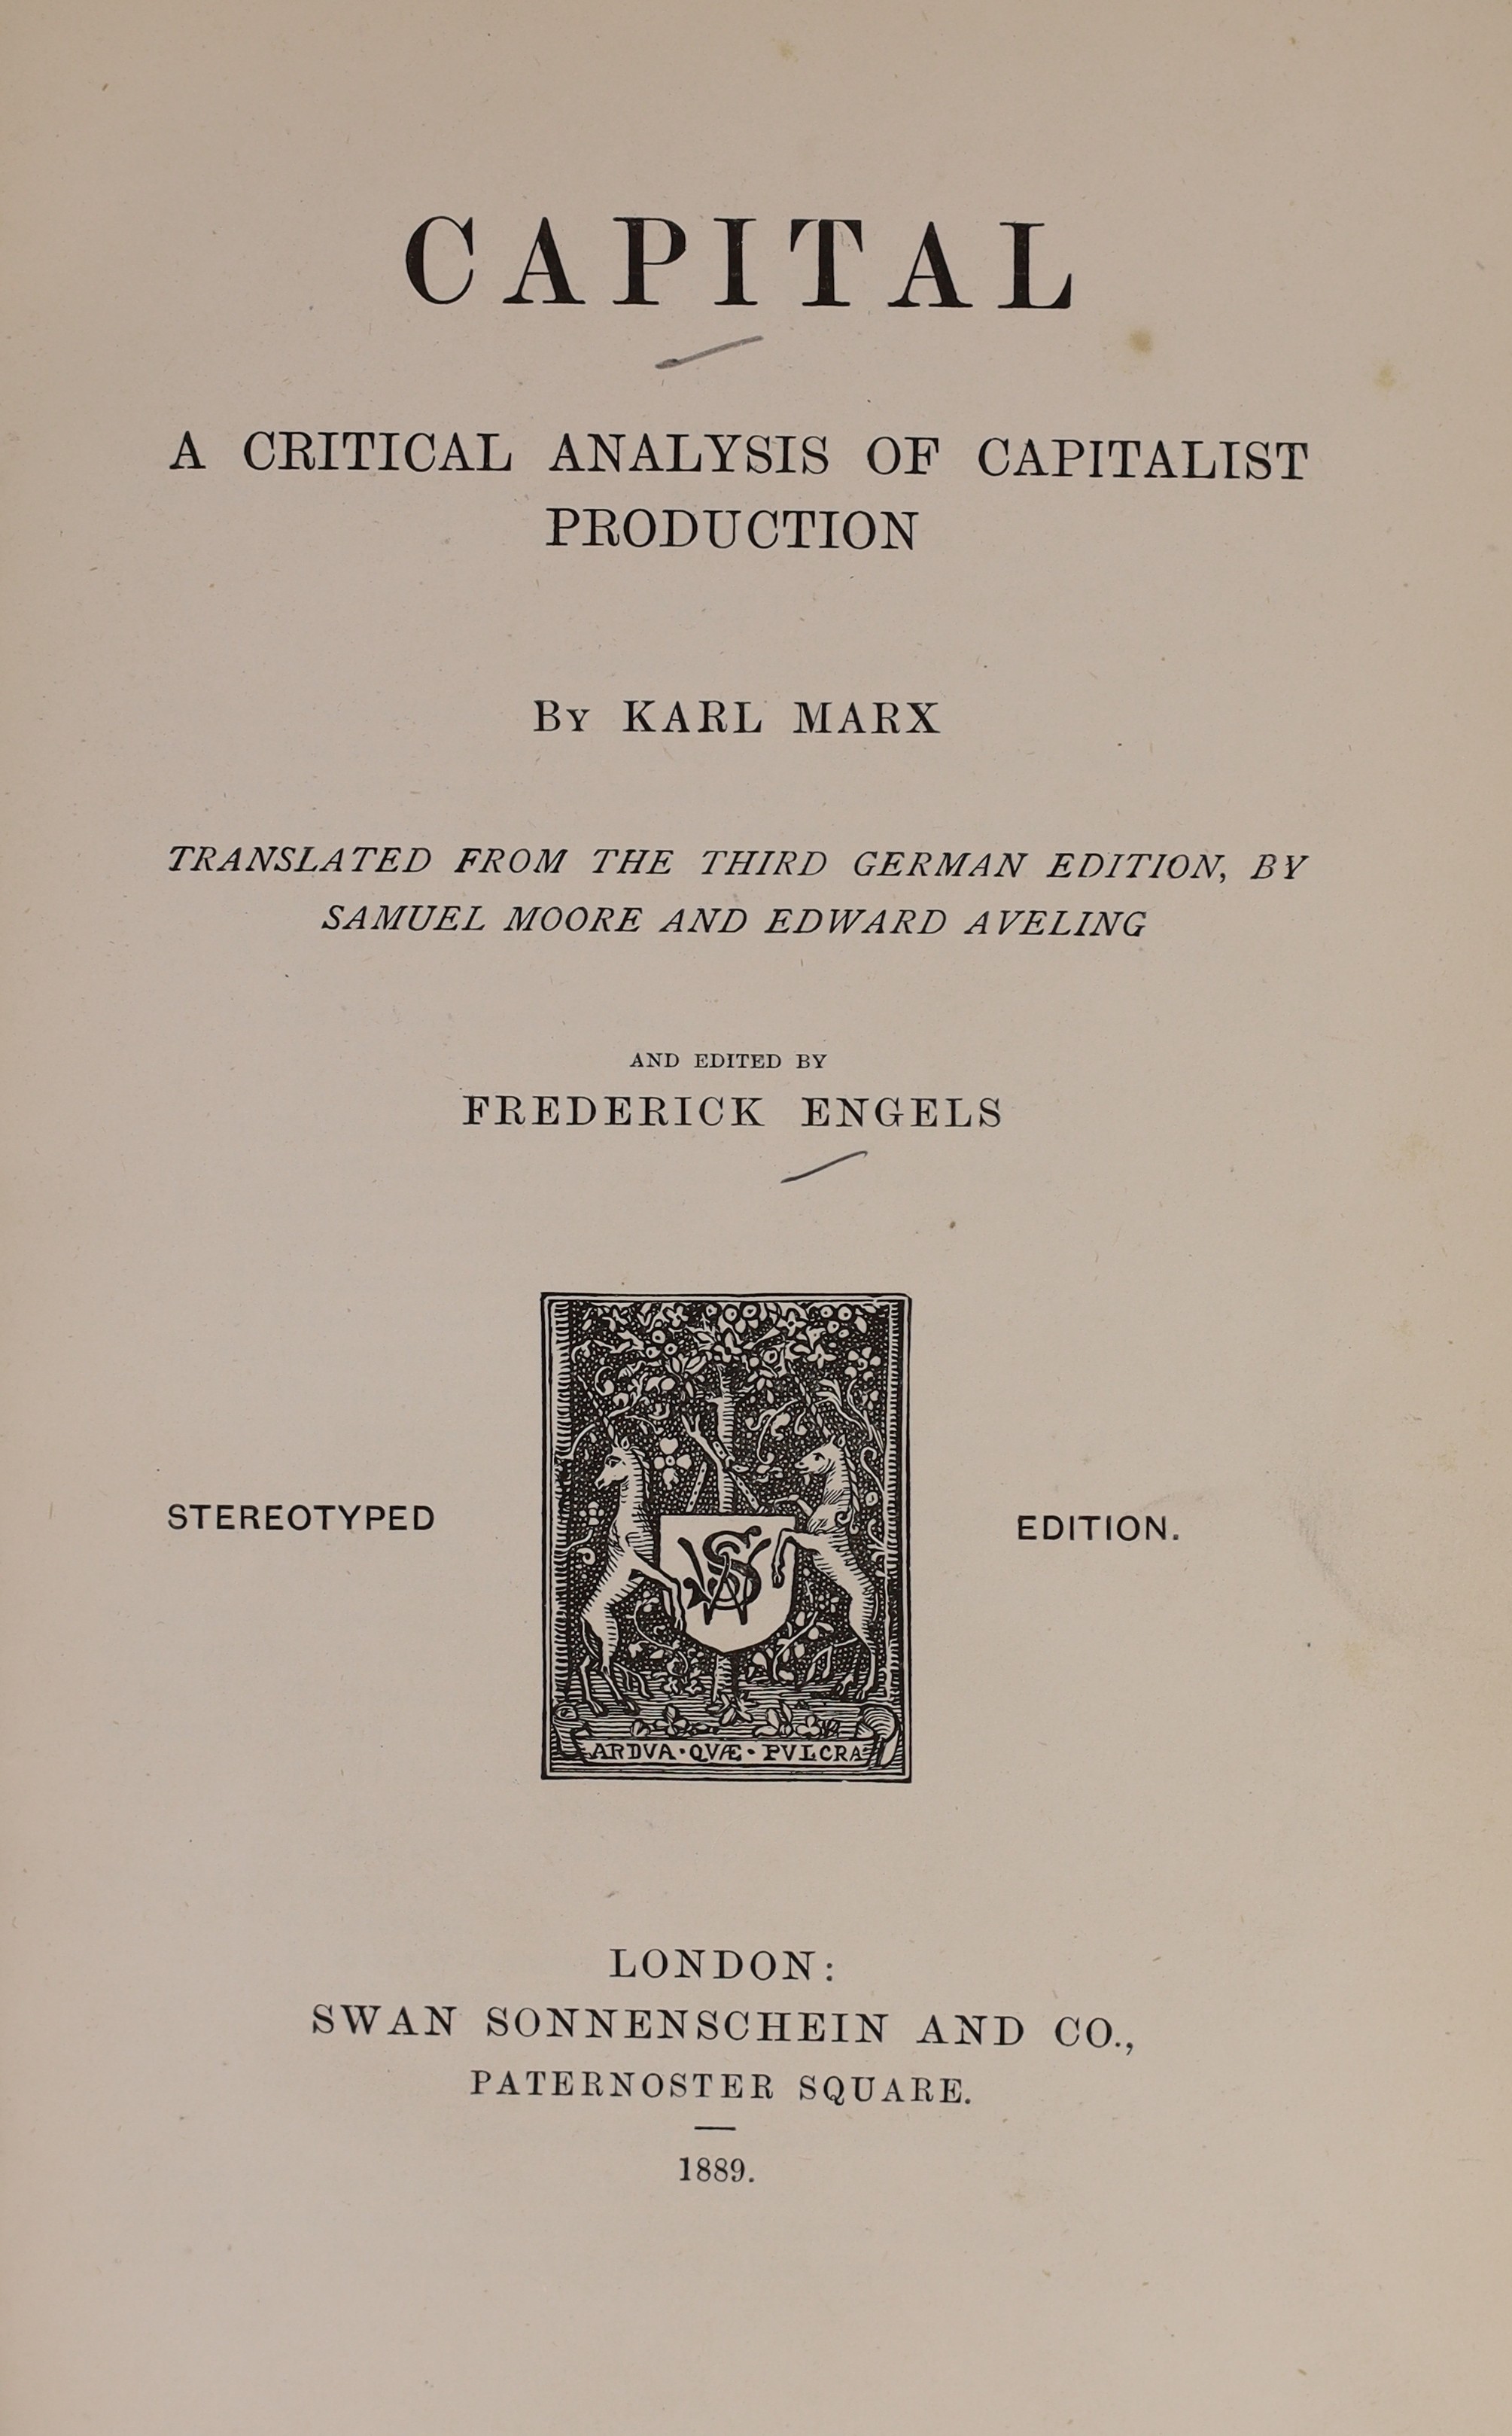 Marx, Karl - Capital. A Critical Analysis of Capitalist Production, translated from the third German edition, by Samuel Moore and Edward Aveling, edited by Frederick Engels, stereotyped edition, 8vo, original blind-stamp